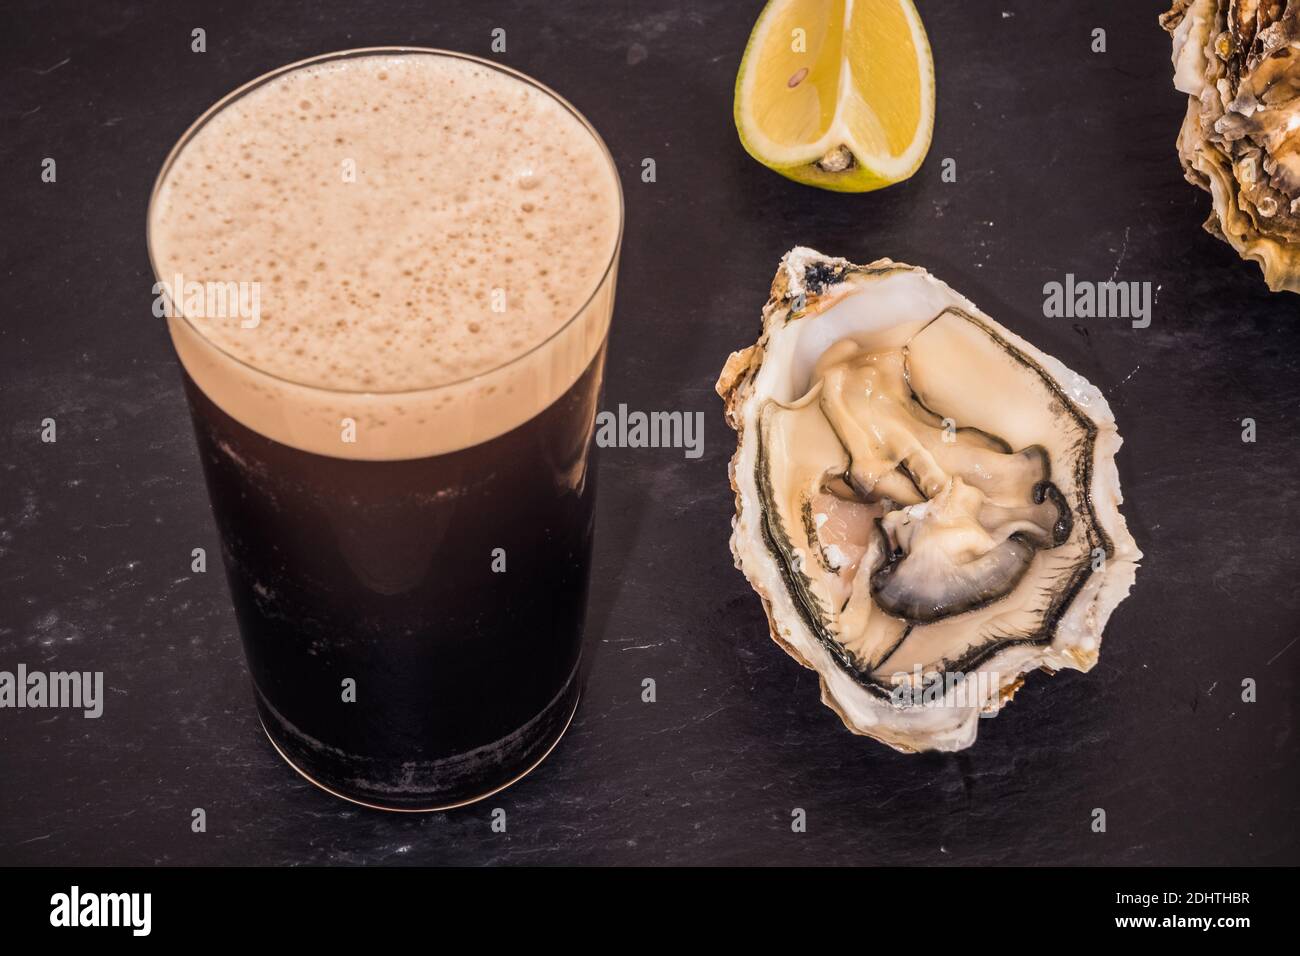 Raw Oyster and Stout with a Lemon Wedge, an Irish Cuisine Speciality Stock Photo